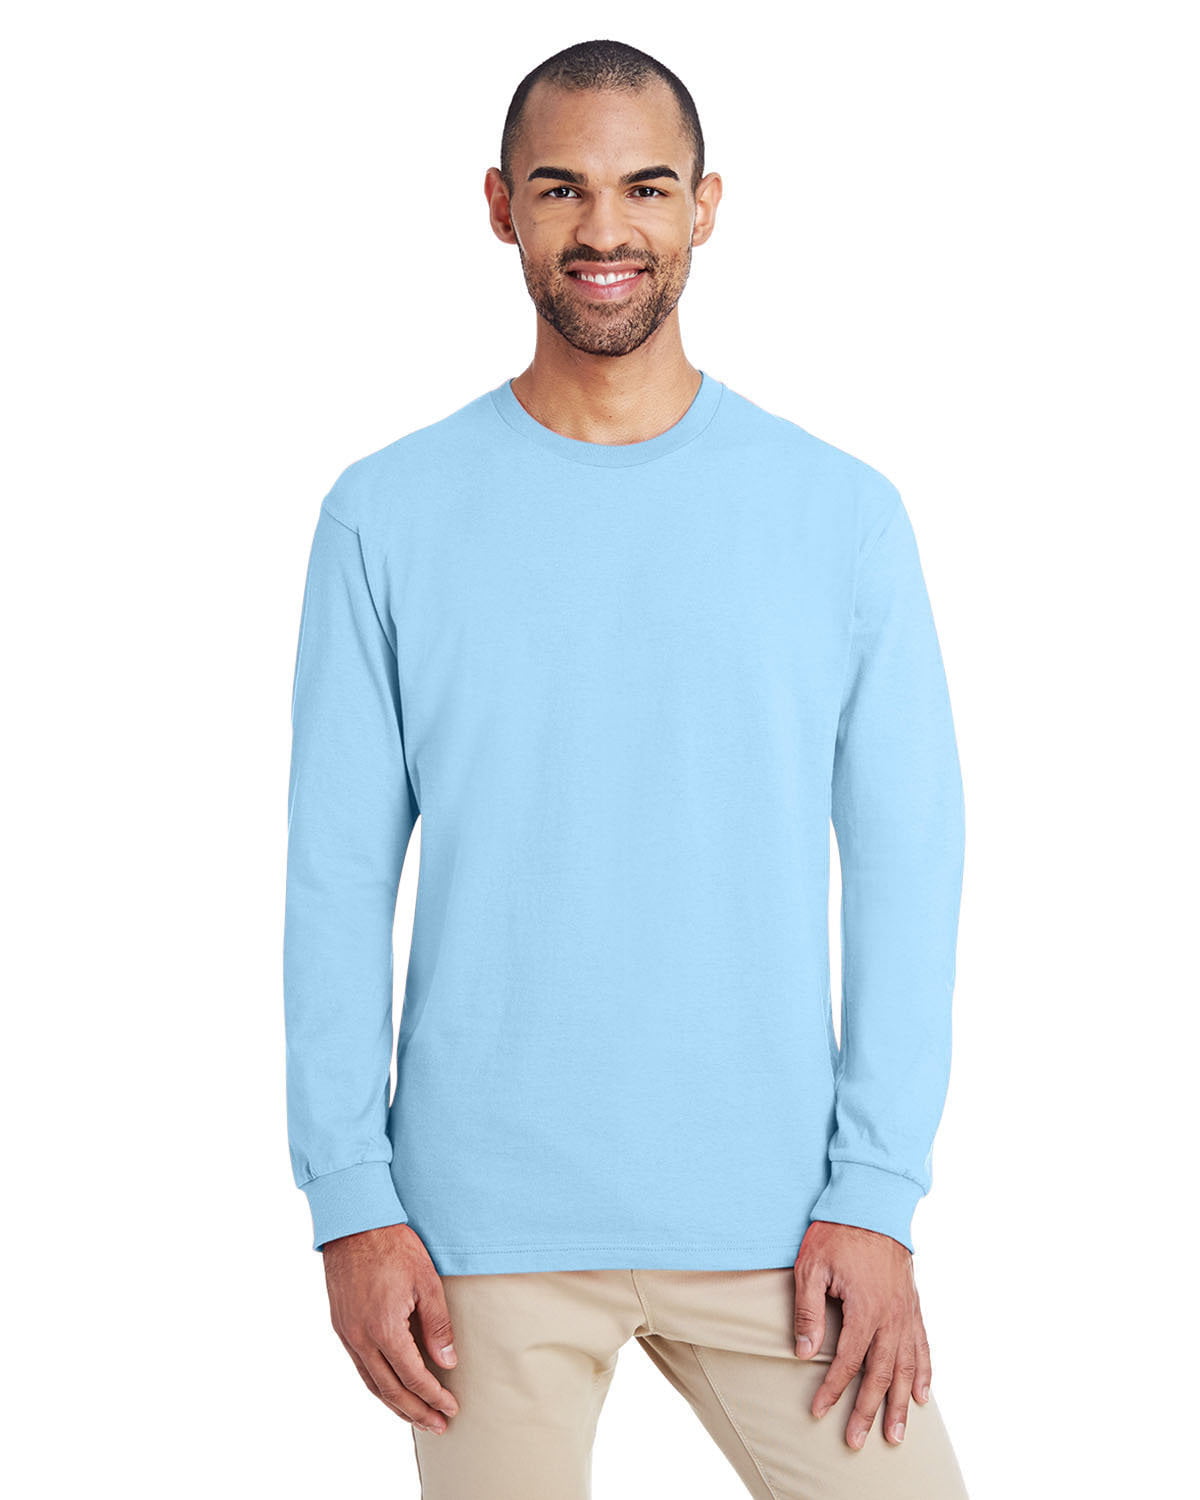 JustBlanks Men's Hammer Long Sleeve Tee Shirt 100% Combed Cotton T